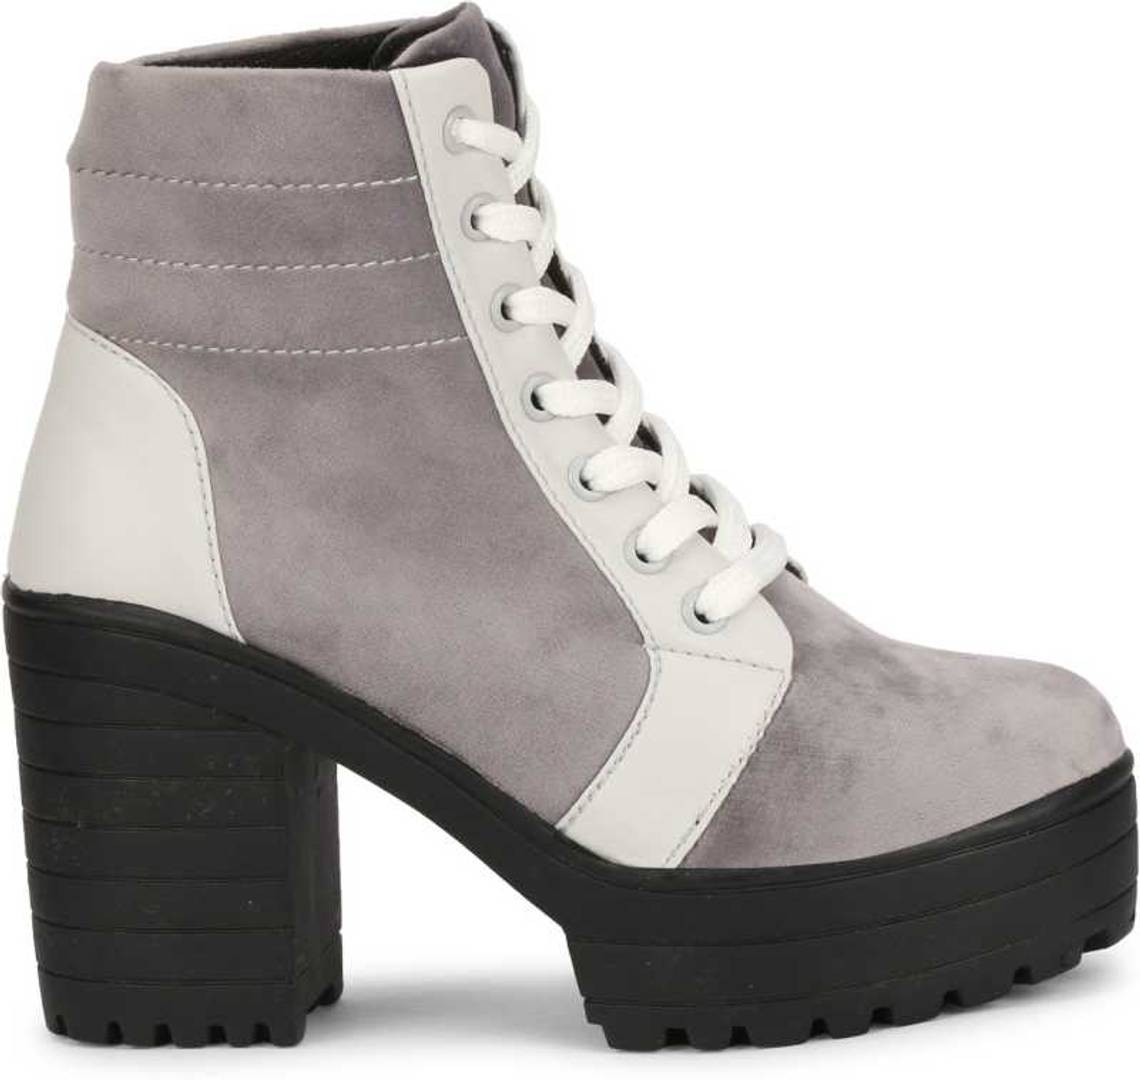 Women's Grey Canvas Boots